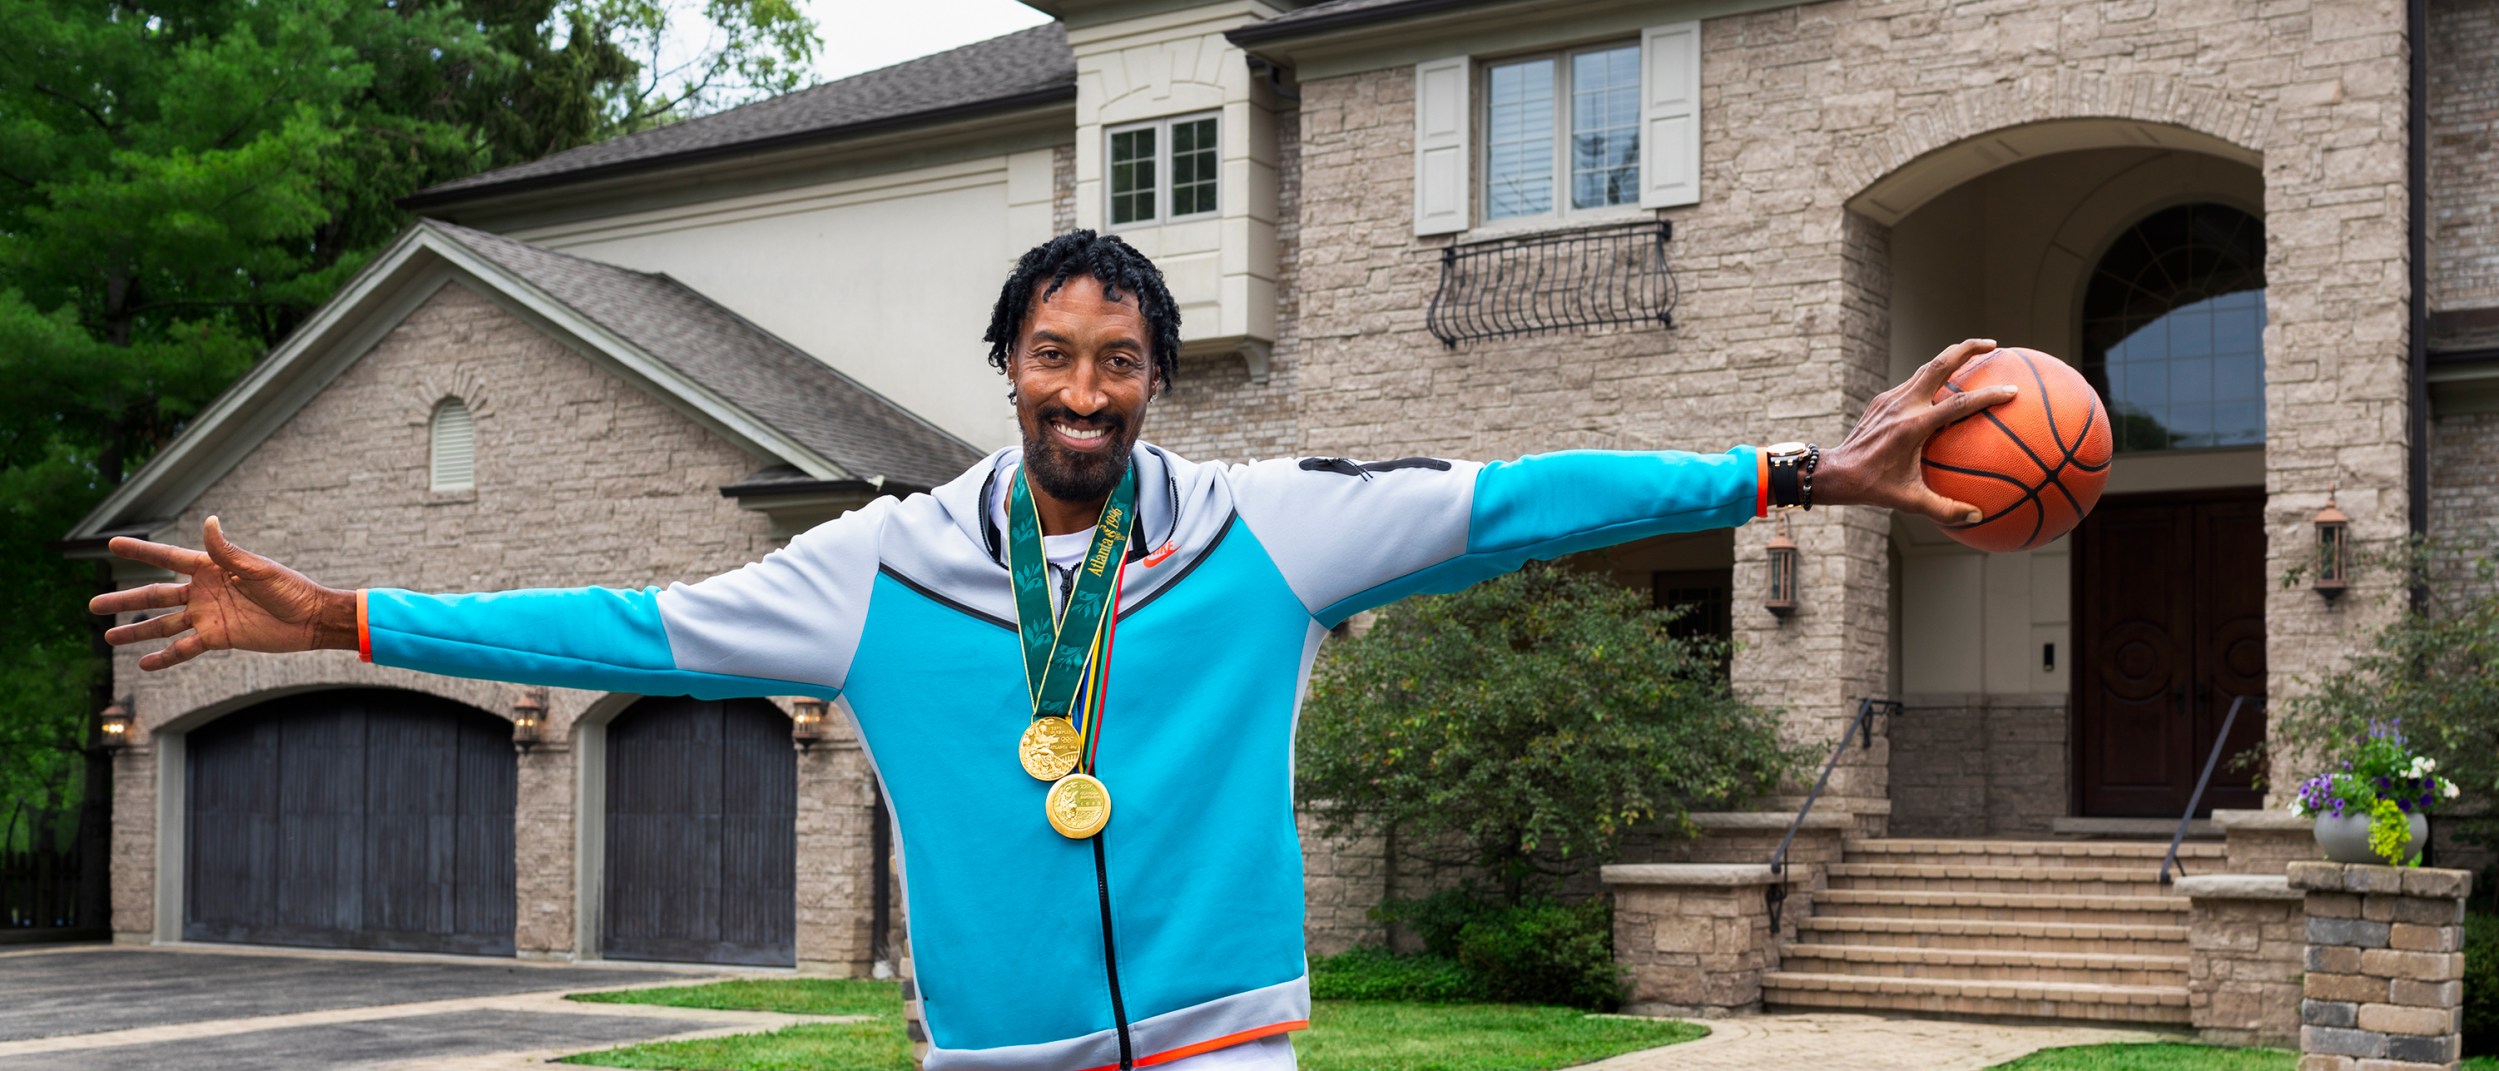 Scottie Pippen palms a basketball outside of his Chicago home that he is listing on Airbnb.